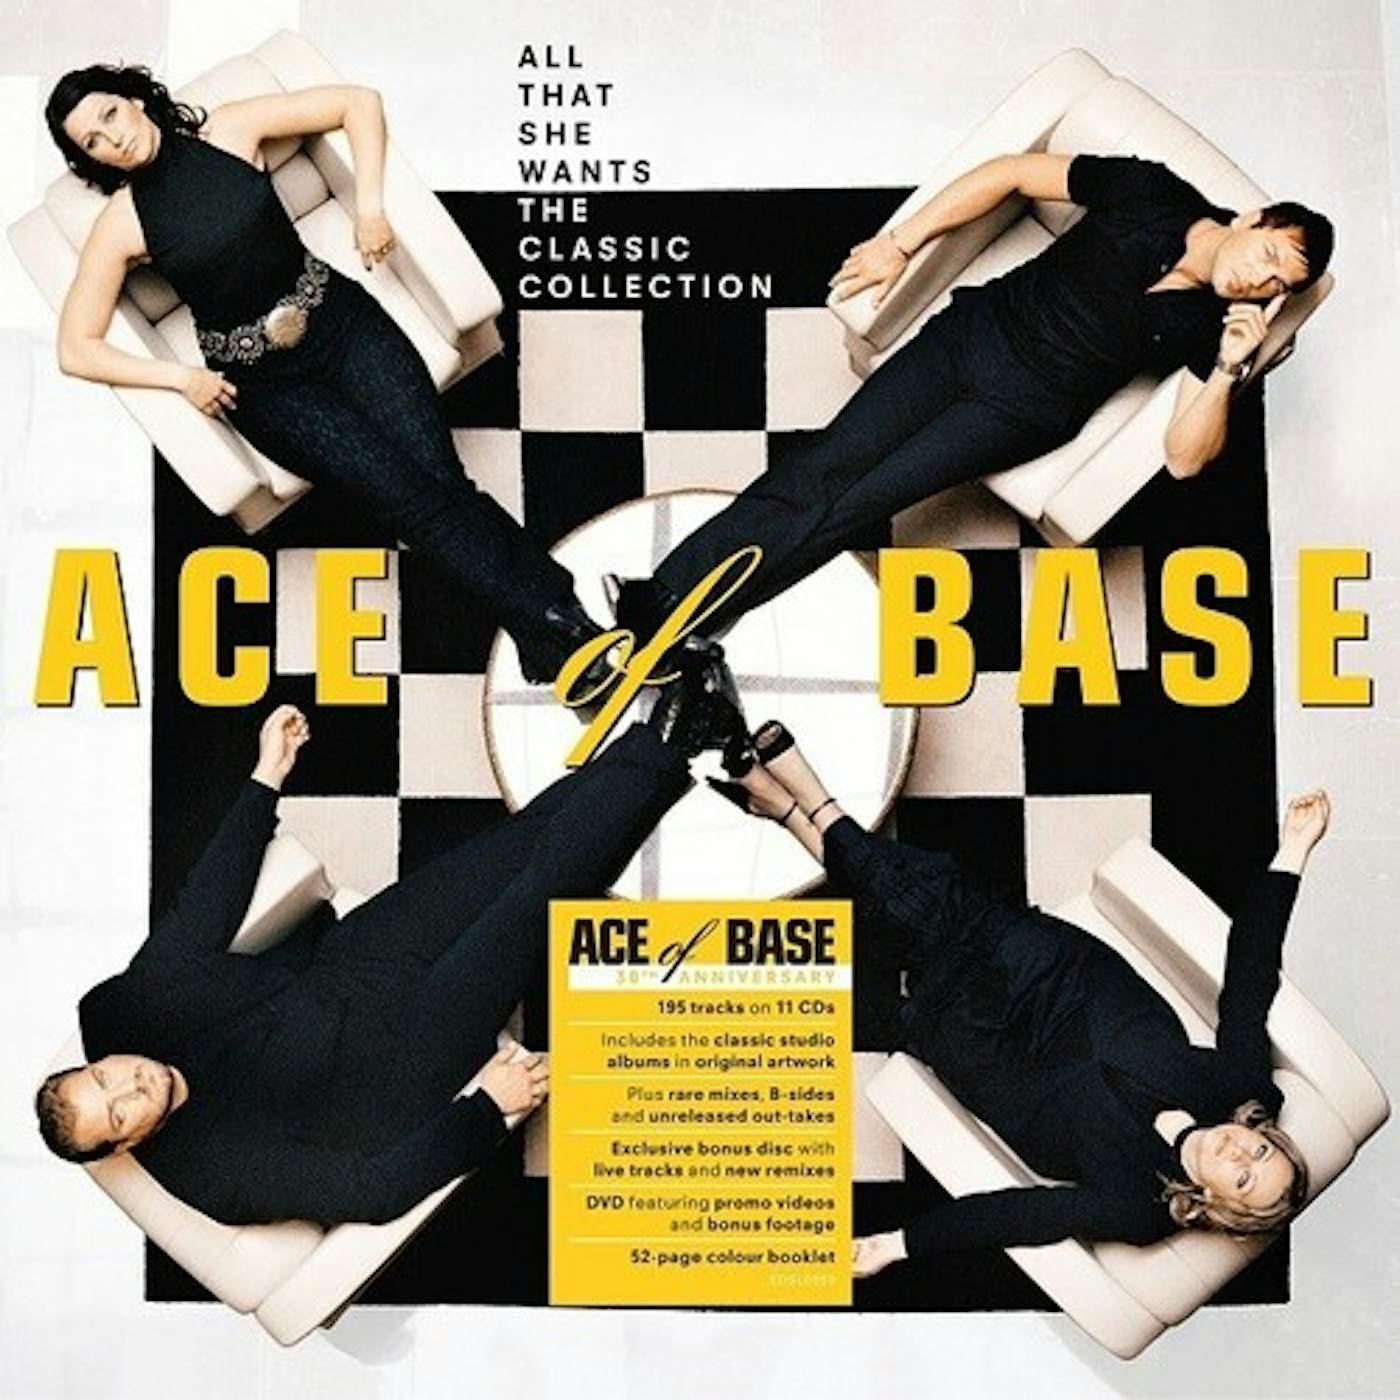 Ace of Base ALL THAT SHE WANTS: THE CLASSIC COLLECTION CD